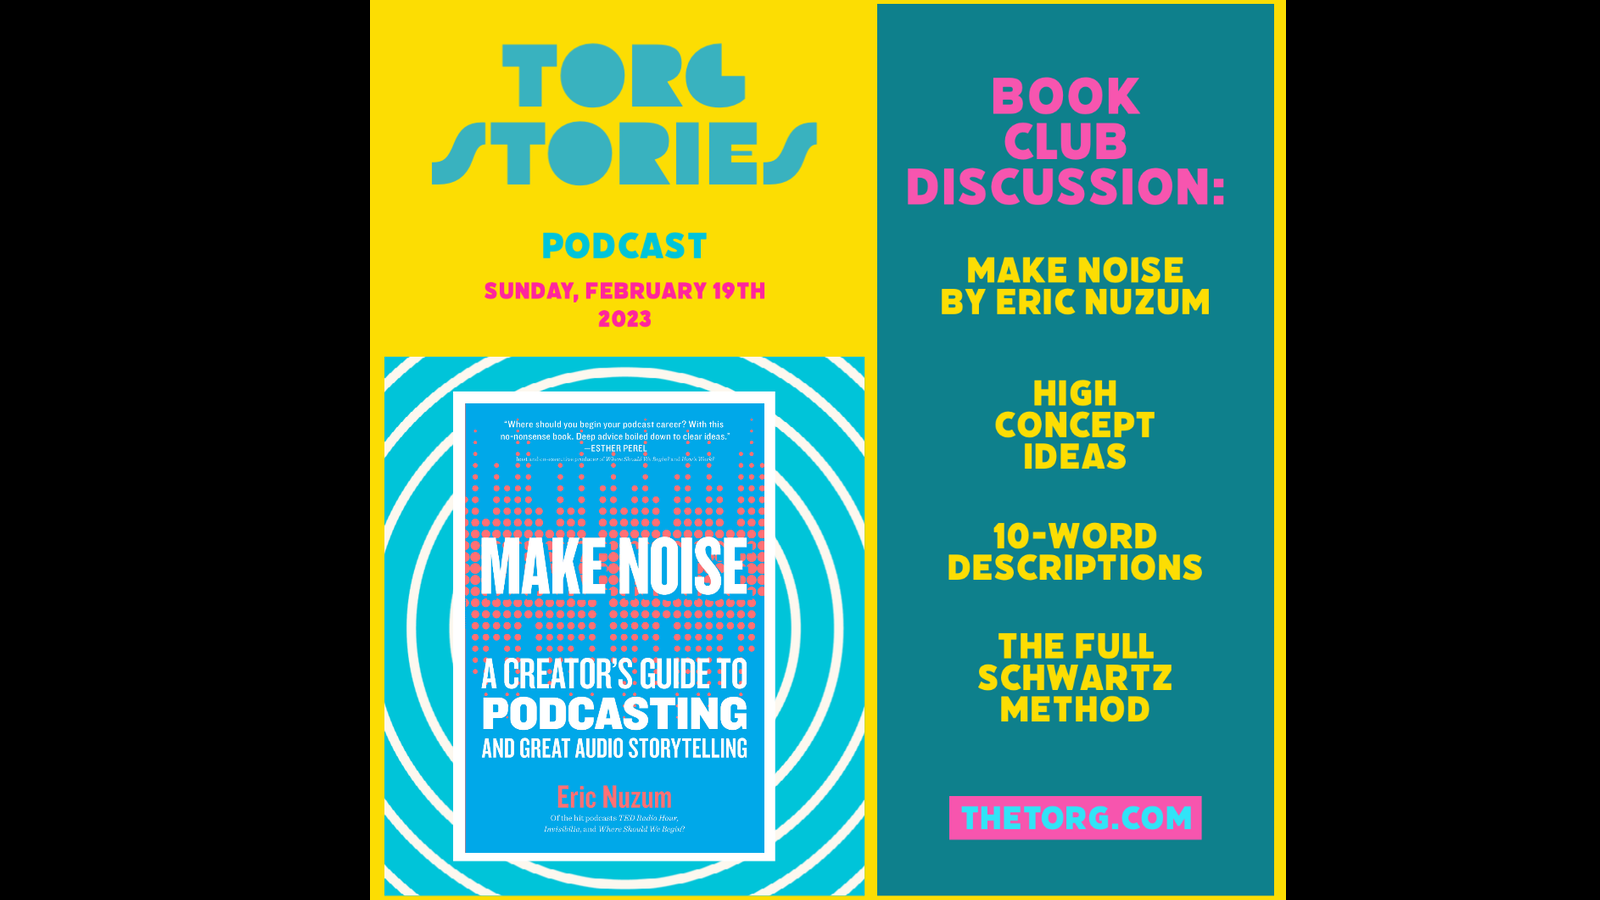 Make Noise: A Creator’s Guide to Podcasting and Great Audio
Storytelling